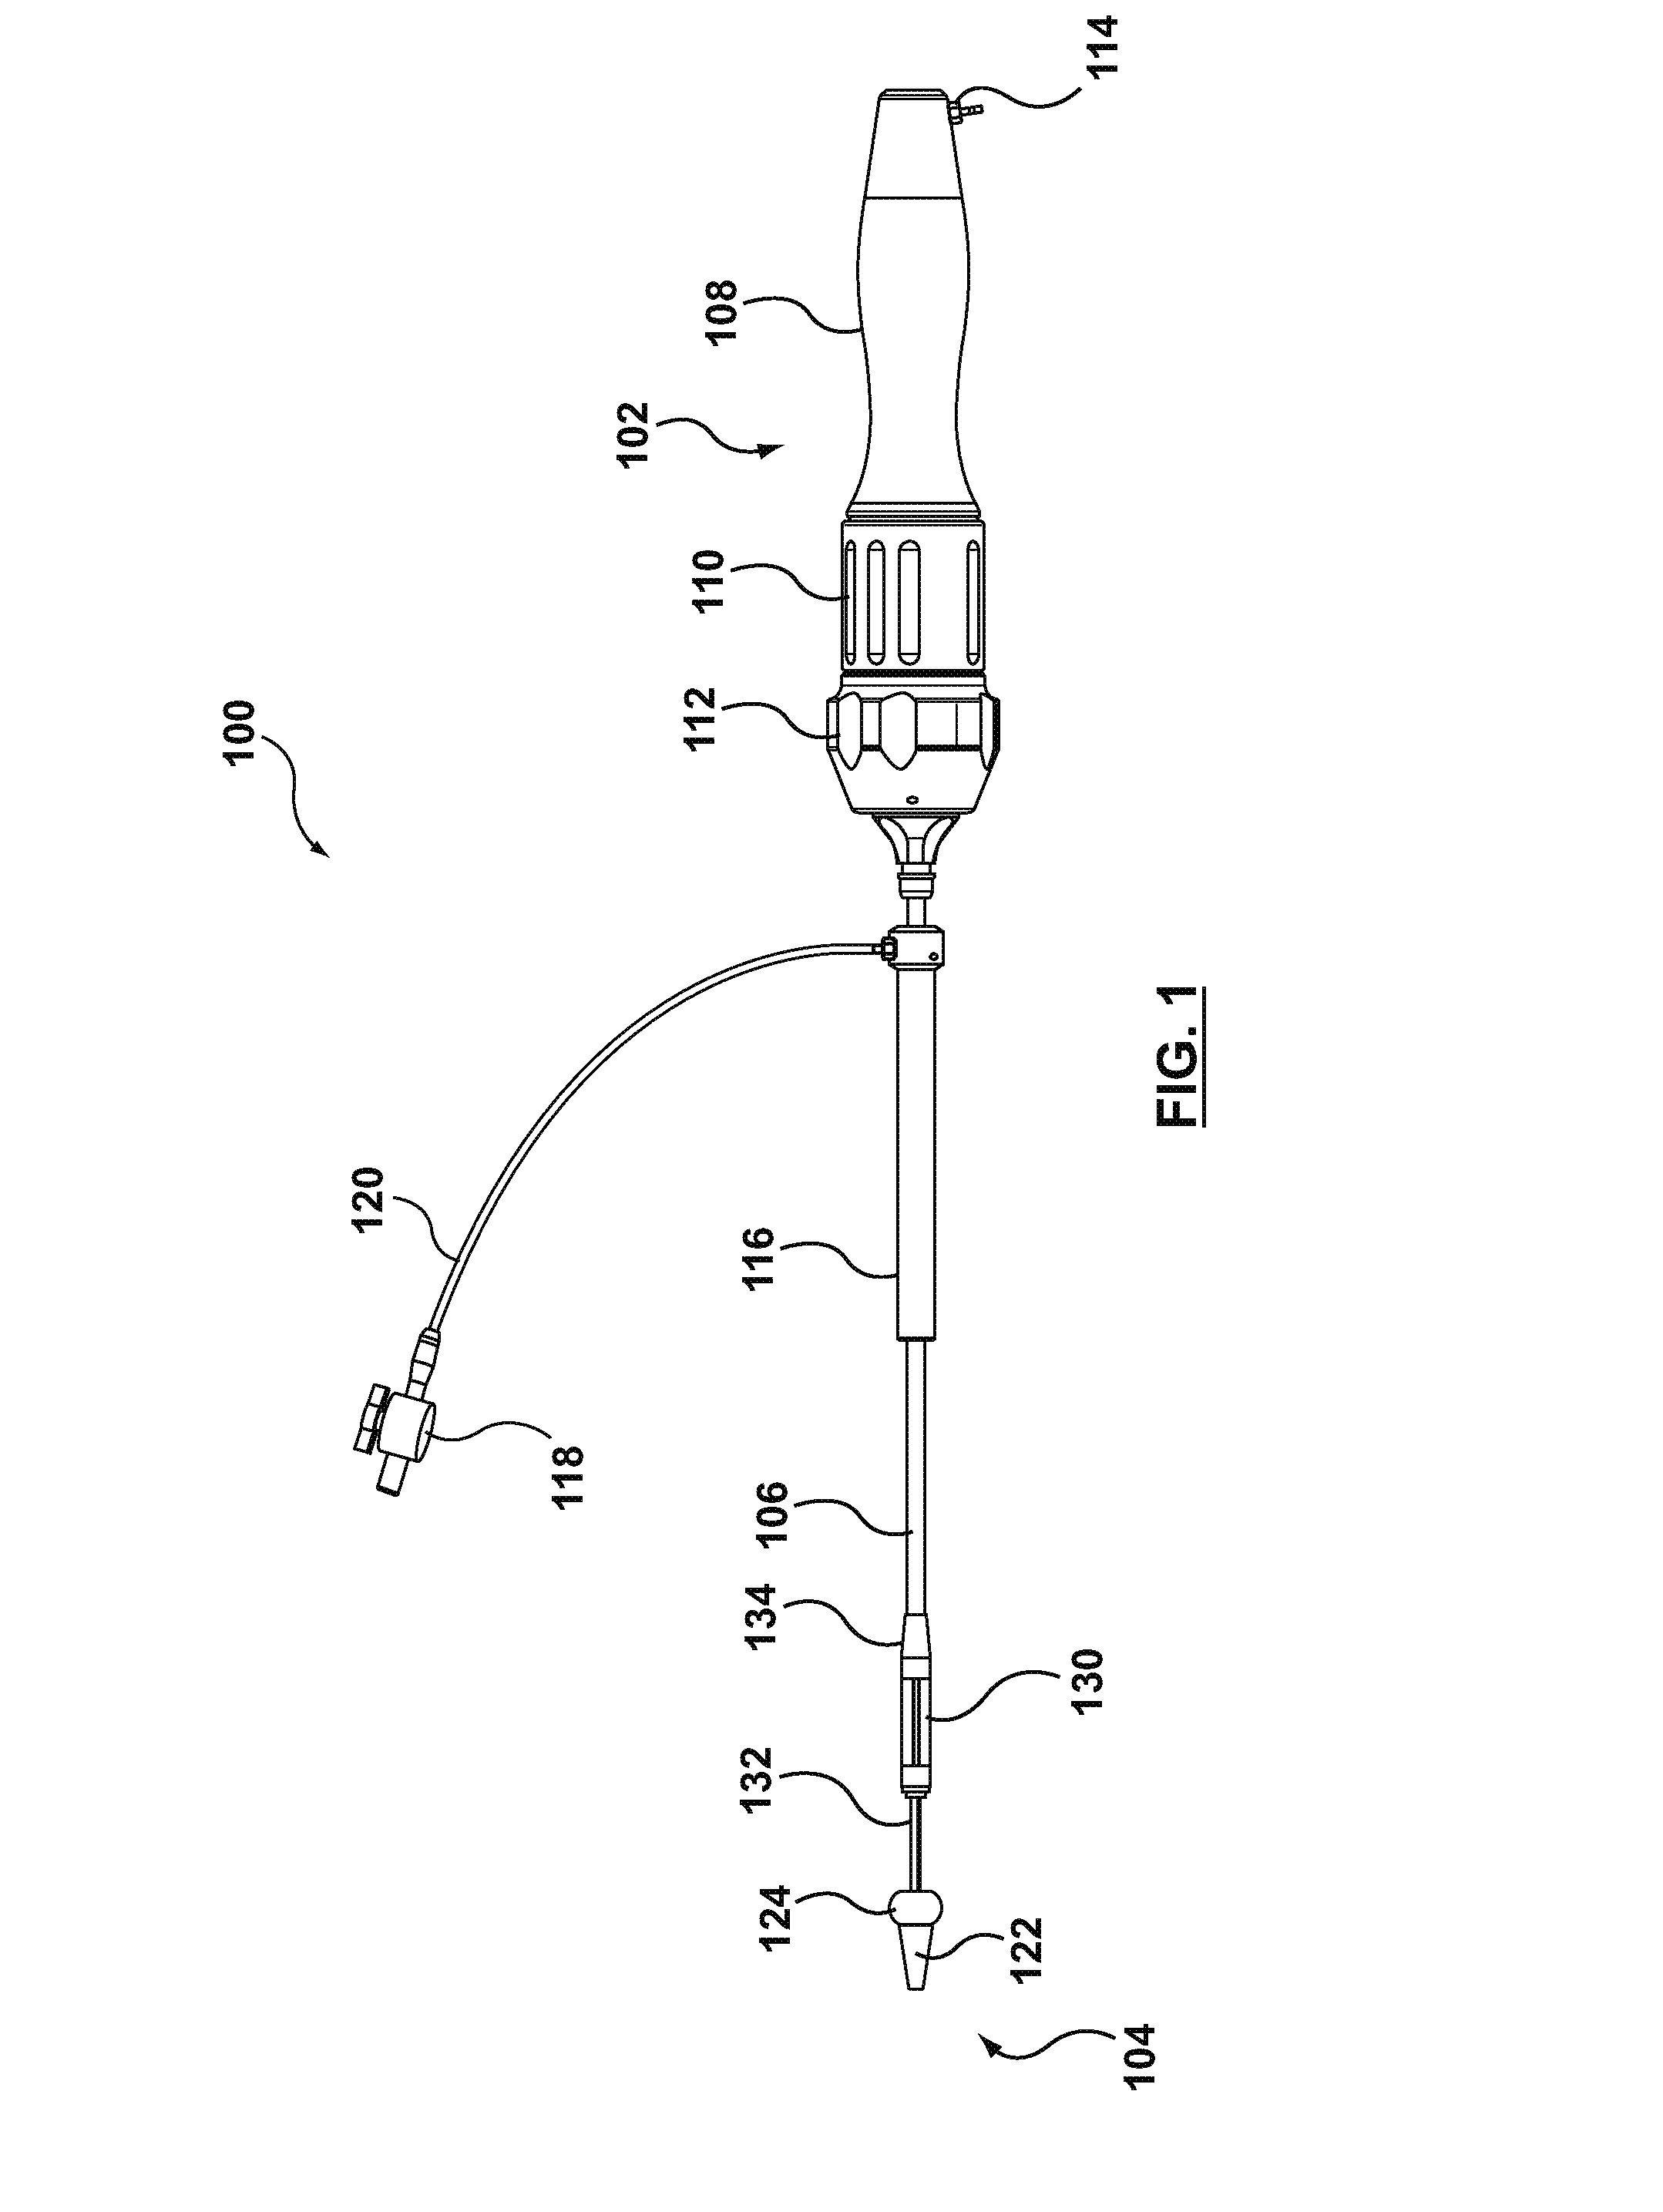 Distal Tip Assembly for a Heart Valve Delivery Catheter